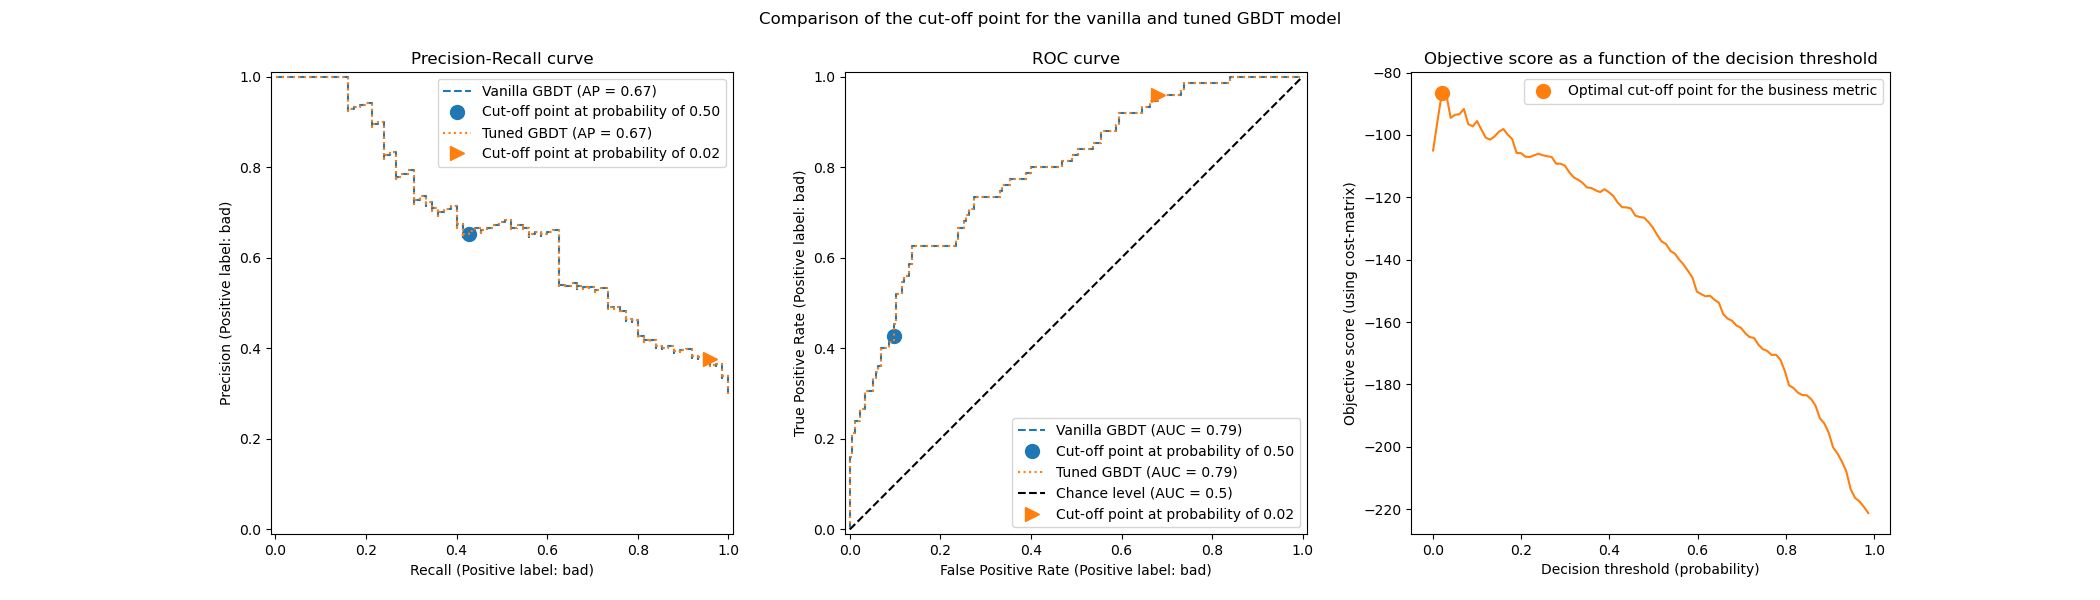 Comparison of the cut-off point for the vanilla and tuned GBDT model, Precision-Recall curve, ROC curve, Objective score as a function of the decision threshold